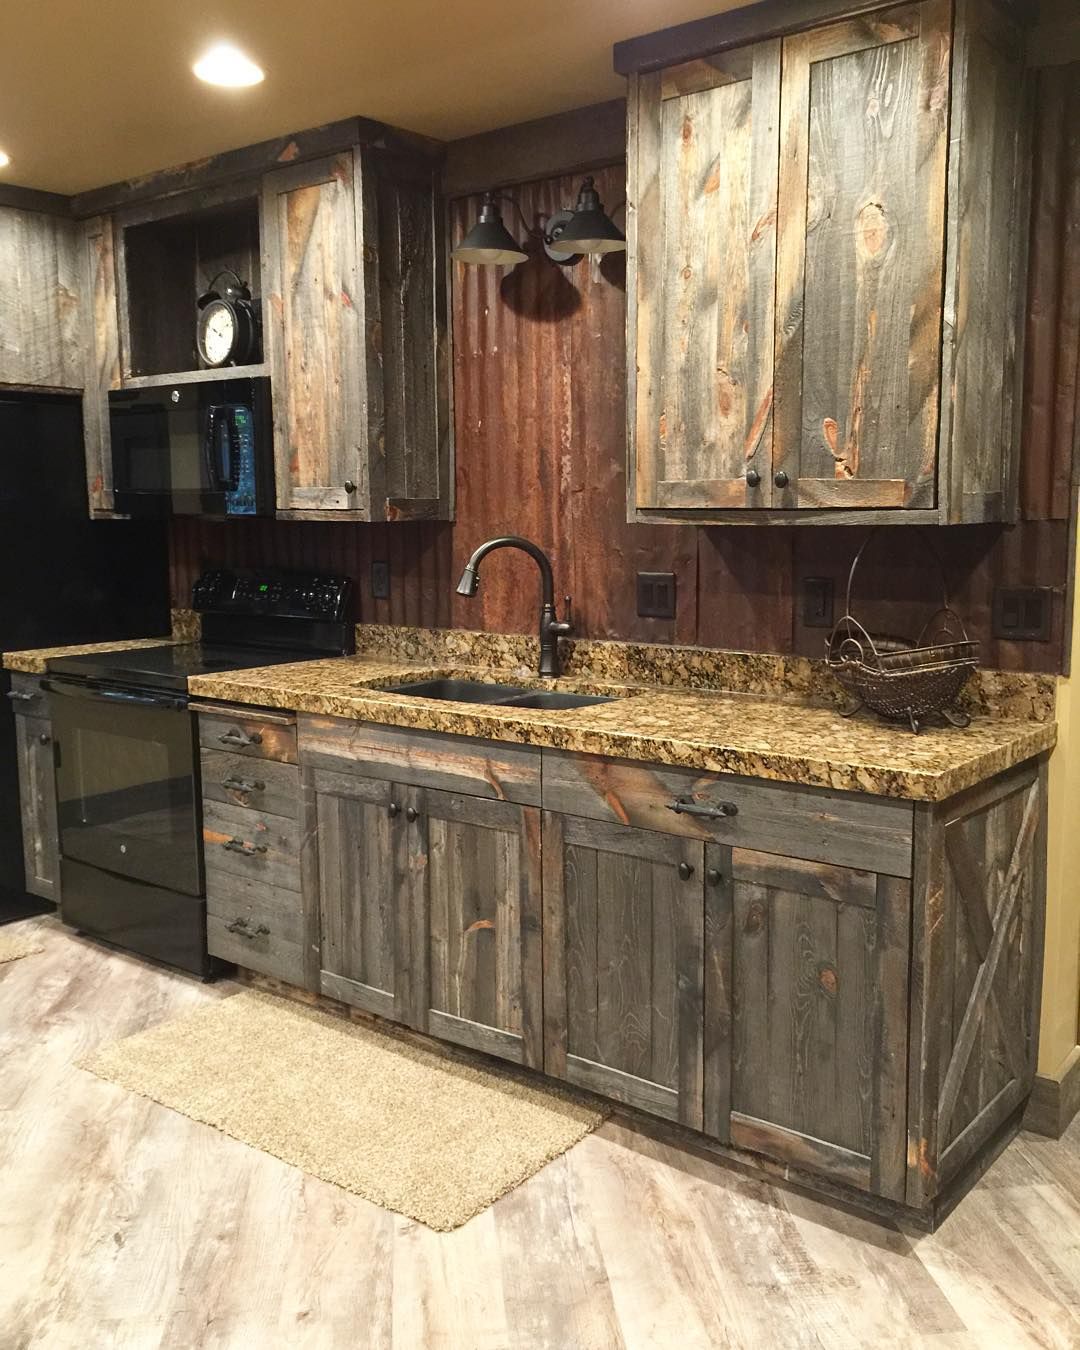 Wooden Rustic Kitchen Cabinets photo - 5